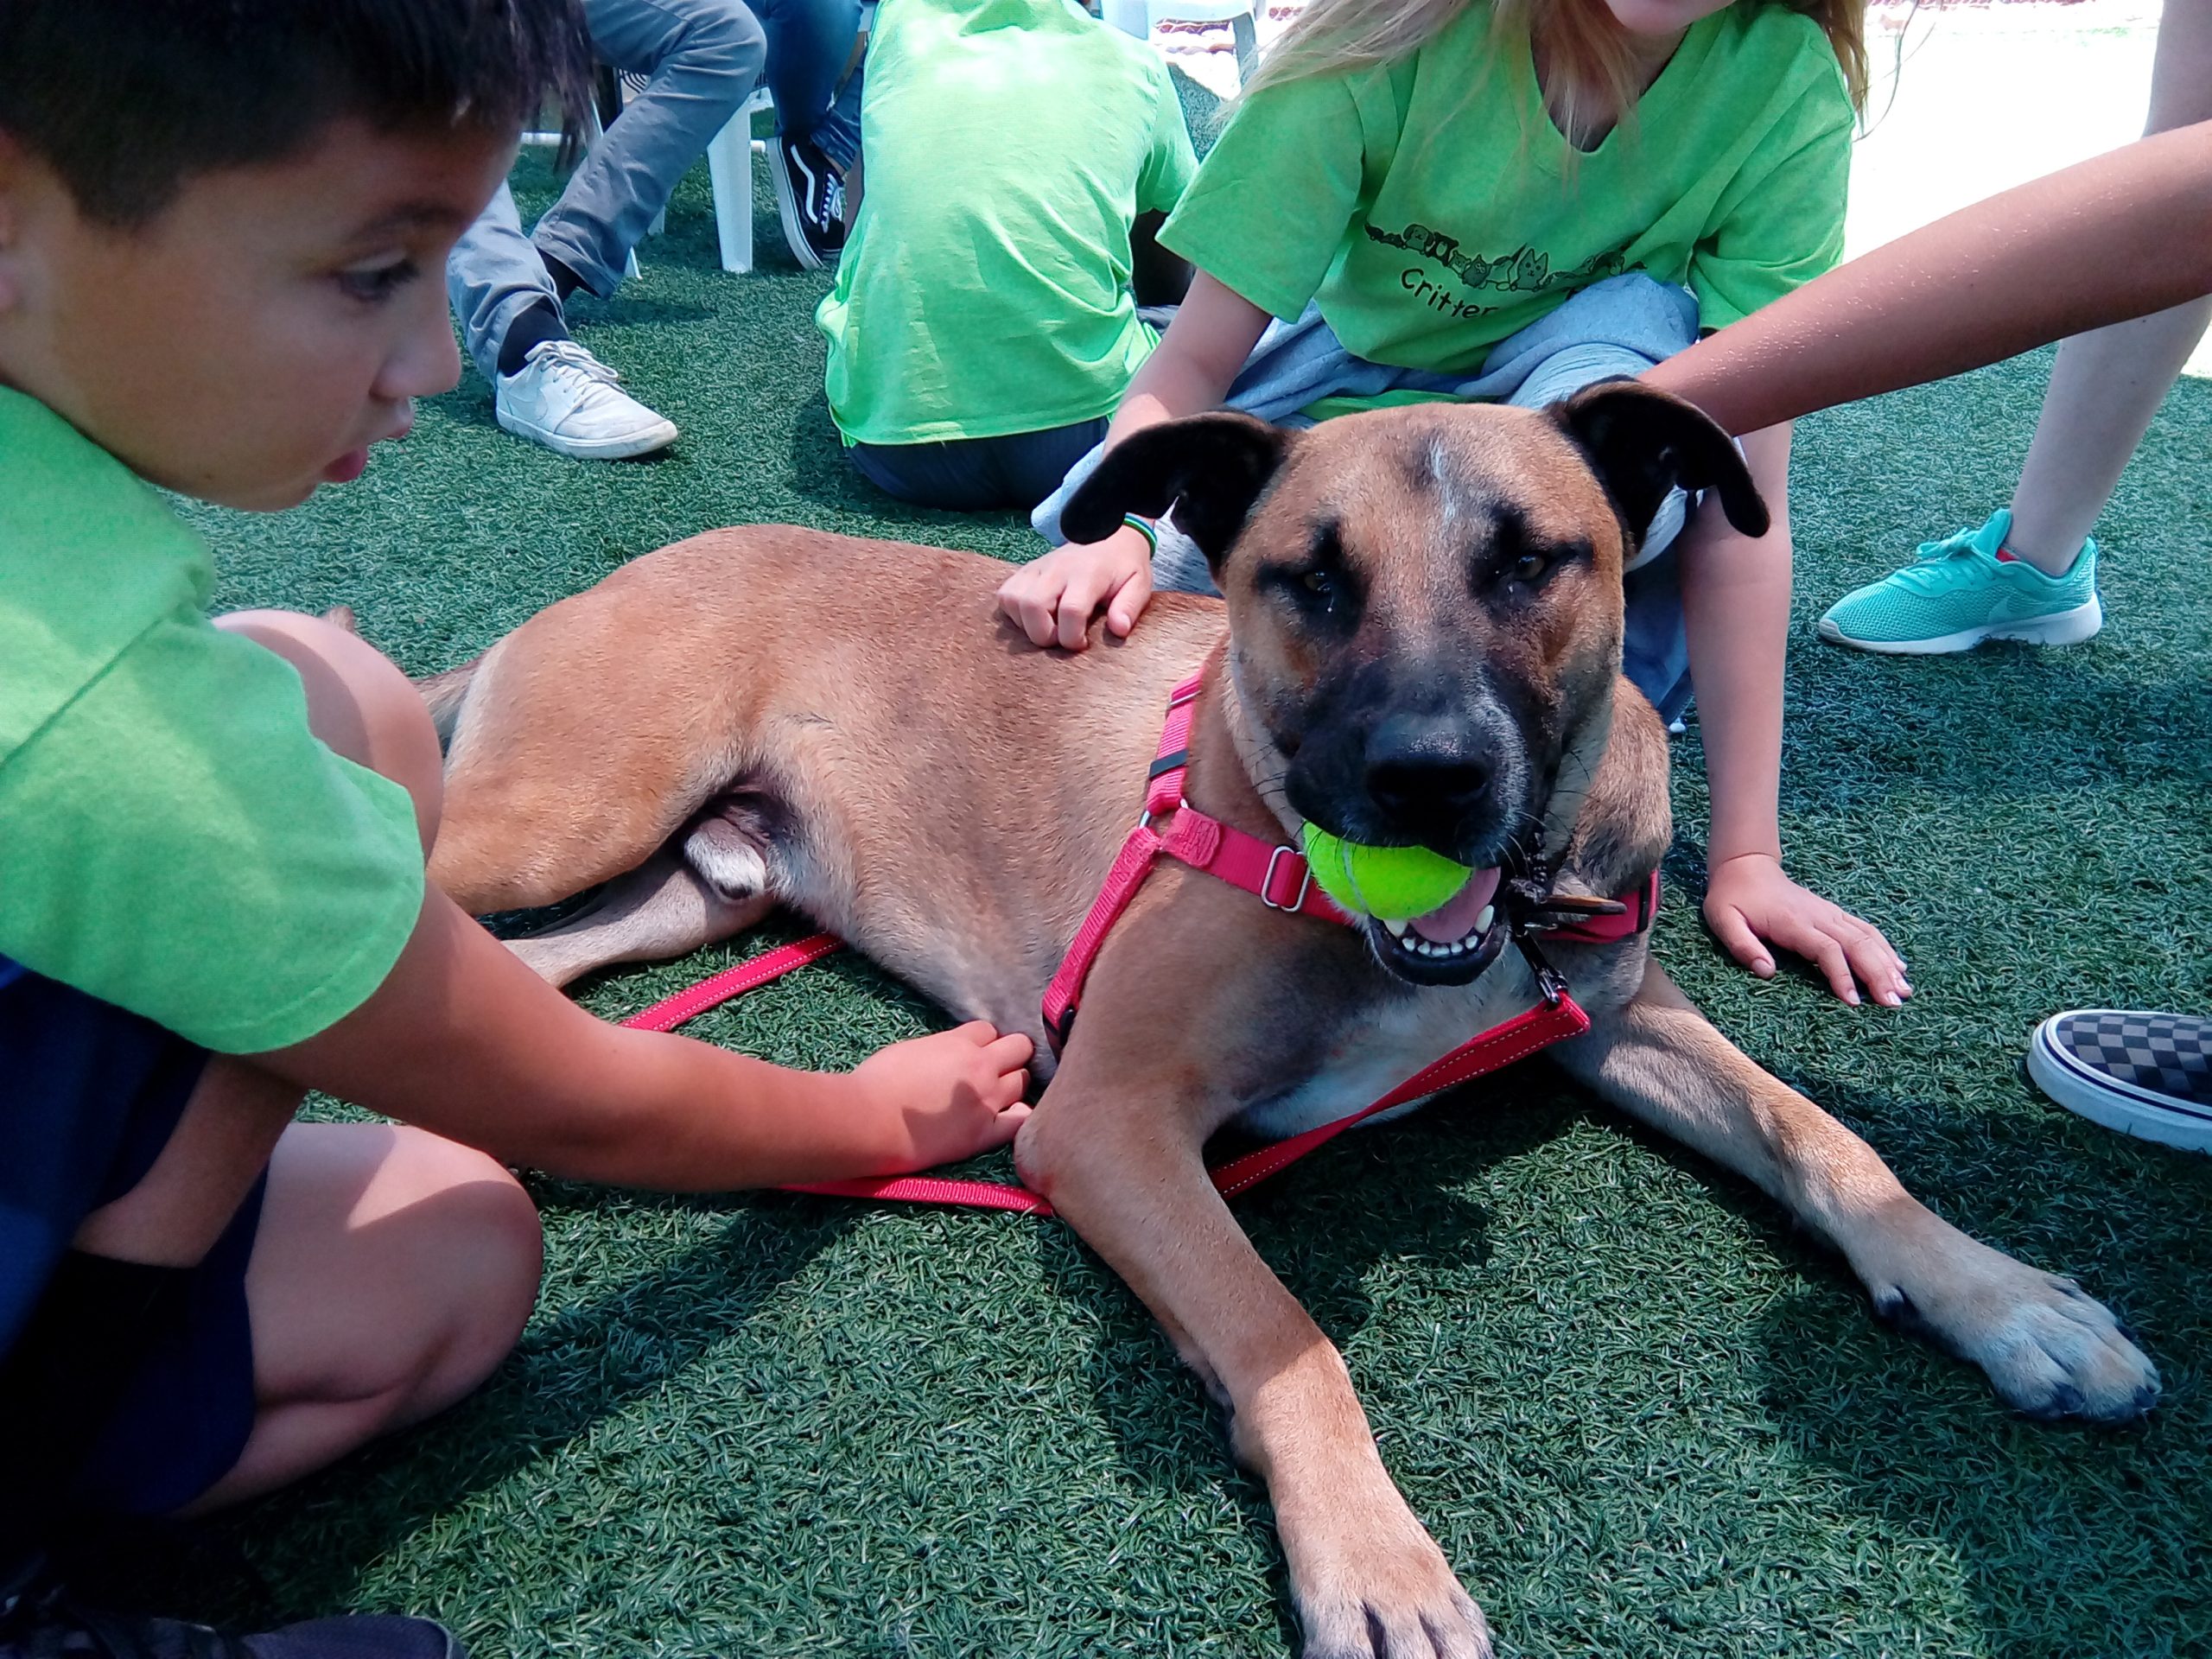 Woods Humane Society Youth Learn to play safely with dogs tip